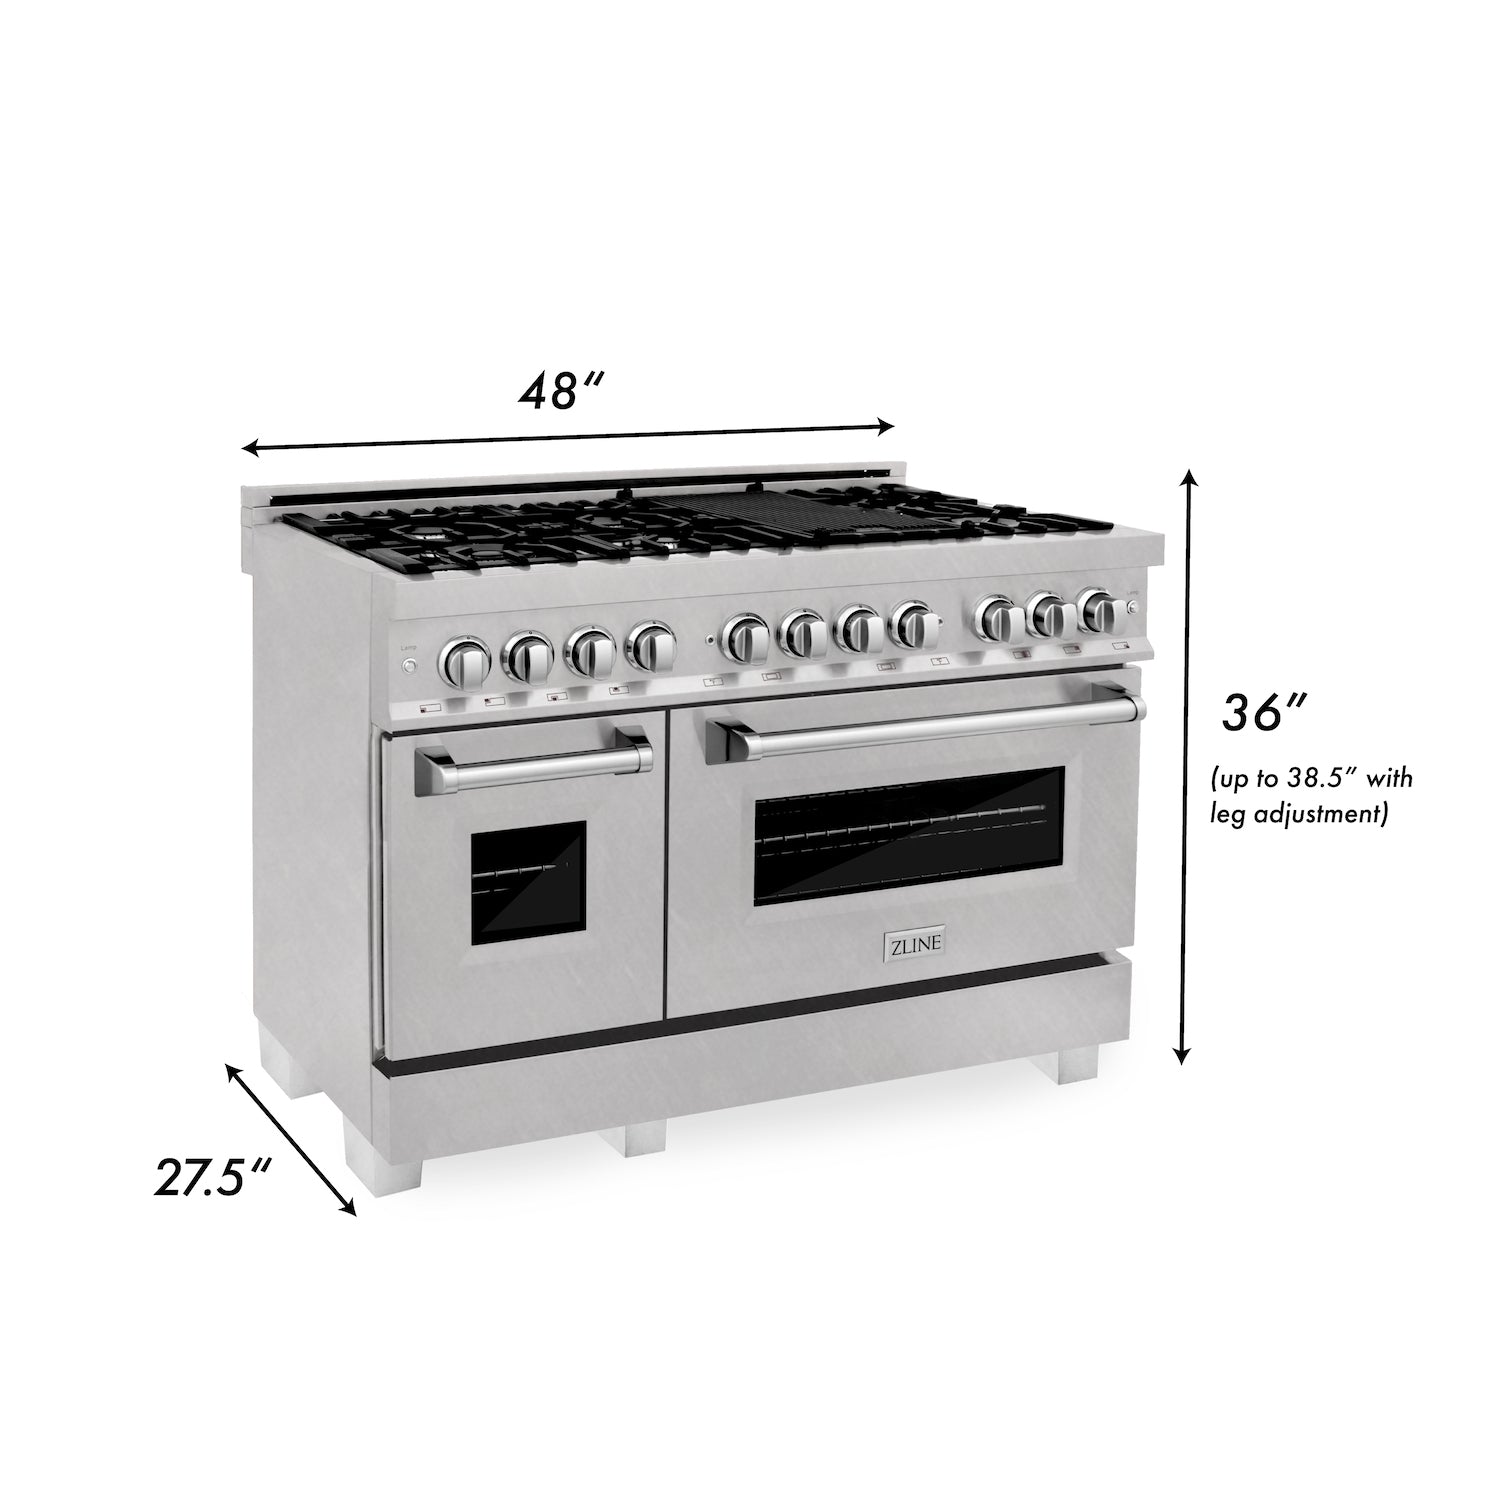 ZLINE 48" 6.0 cu. ft. Electric Oven and Gas Cooktop Dual Fuel Range with Griddle in Fingerprint Resistant Stainless (RAS-SN-GR-48)